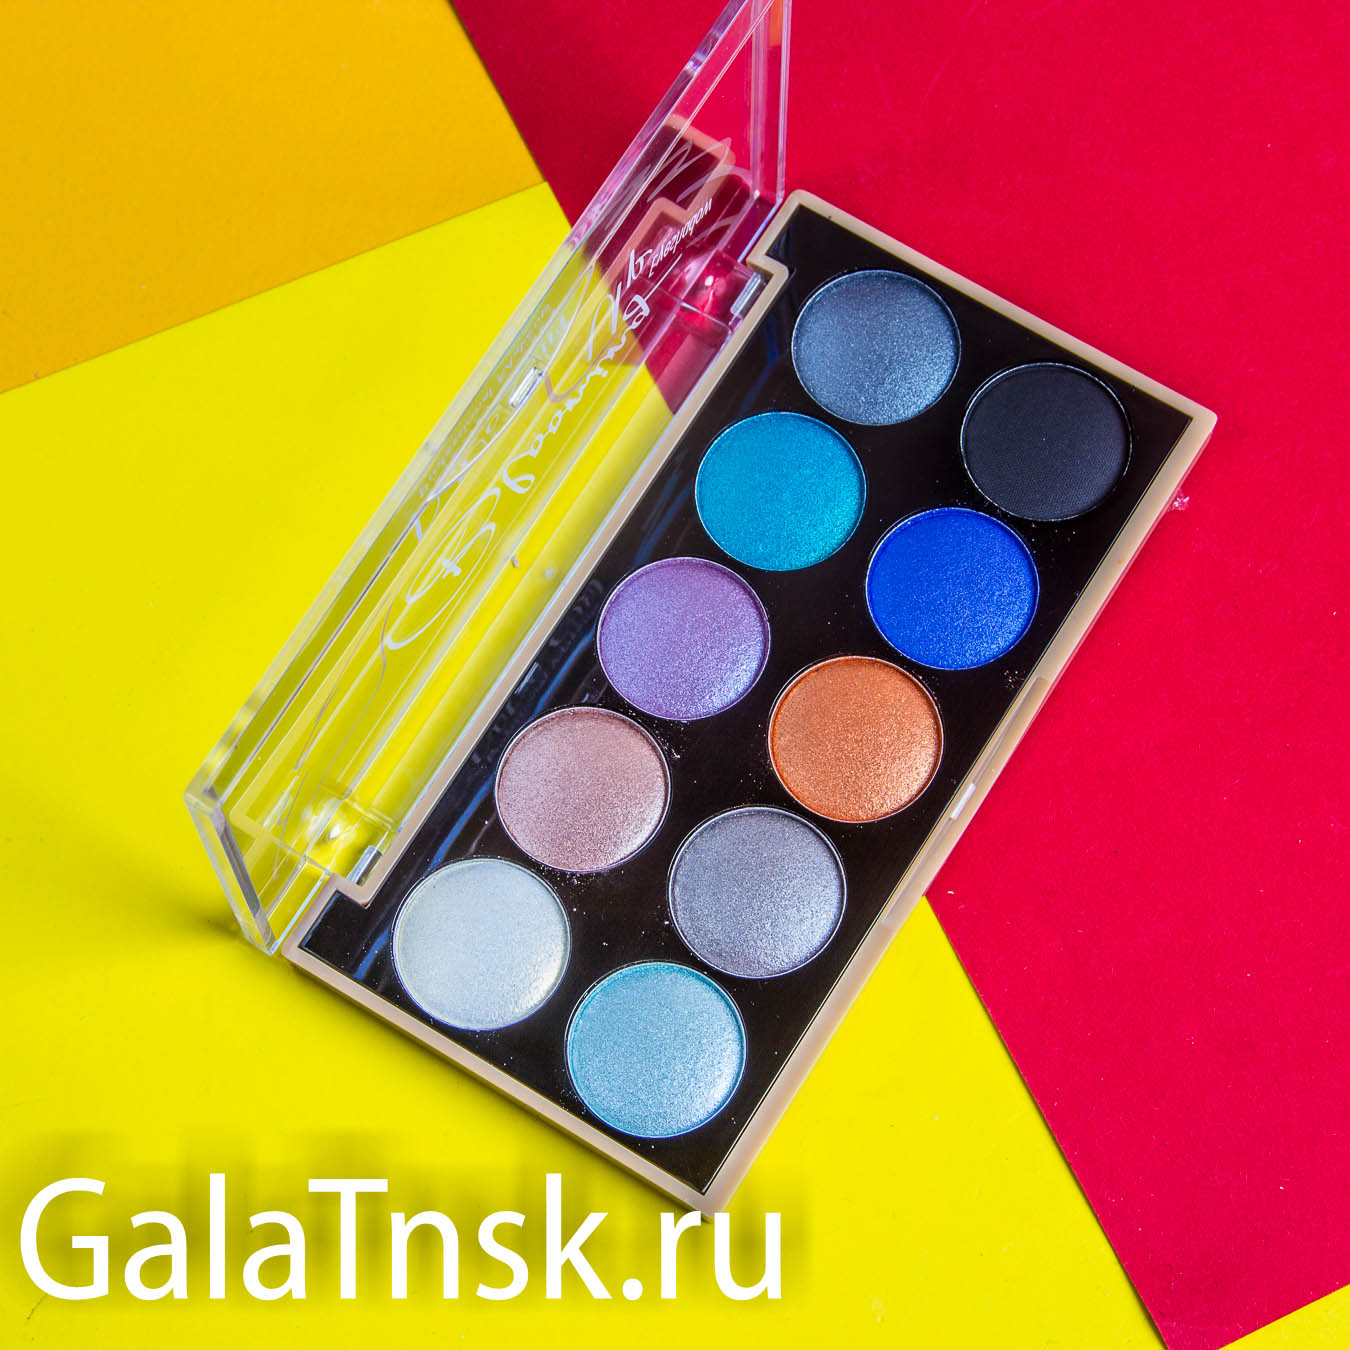 DO DO GIPL Тени BLOOMING UP 10colors D3251 03